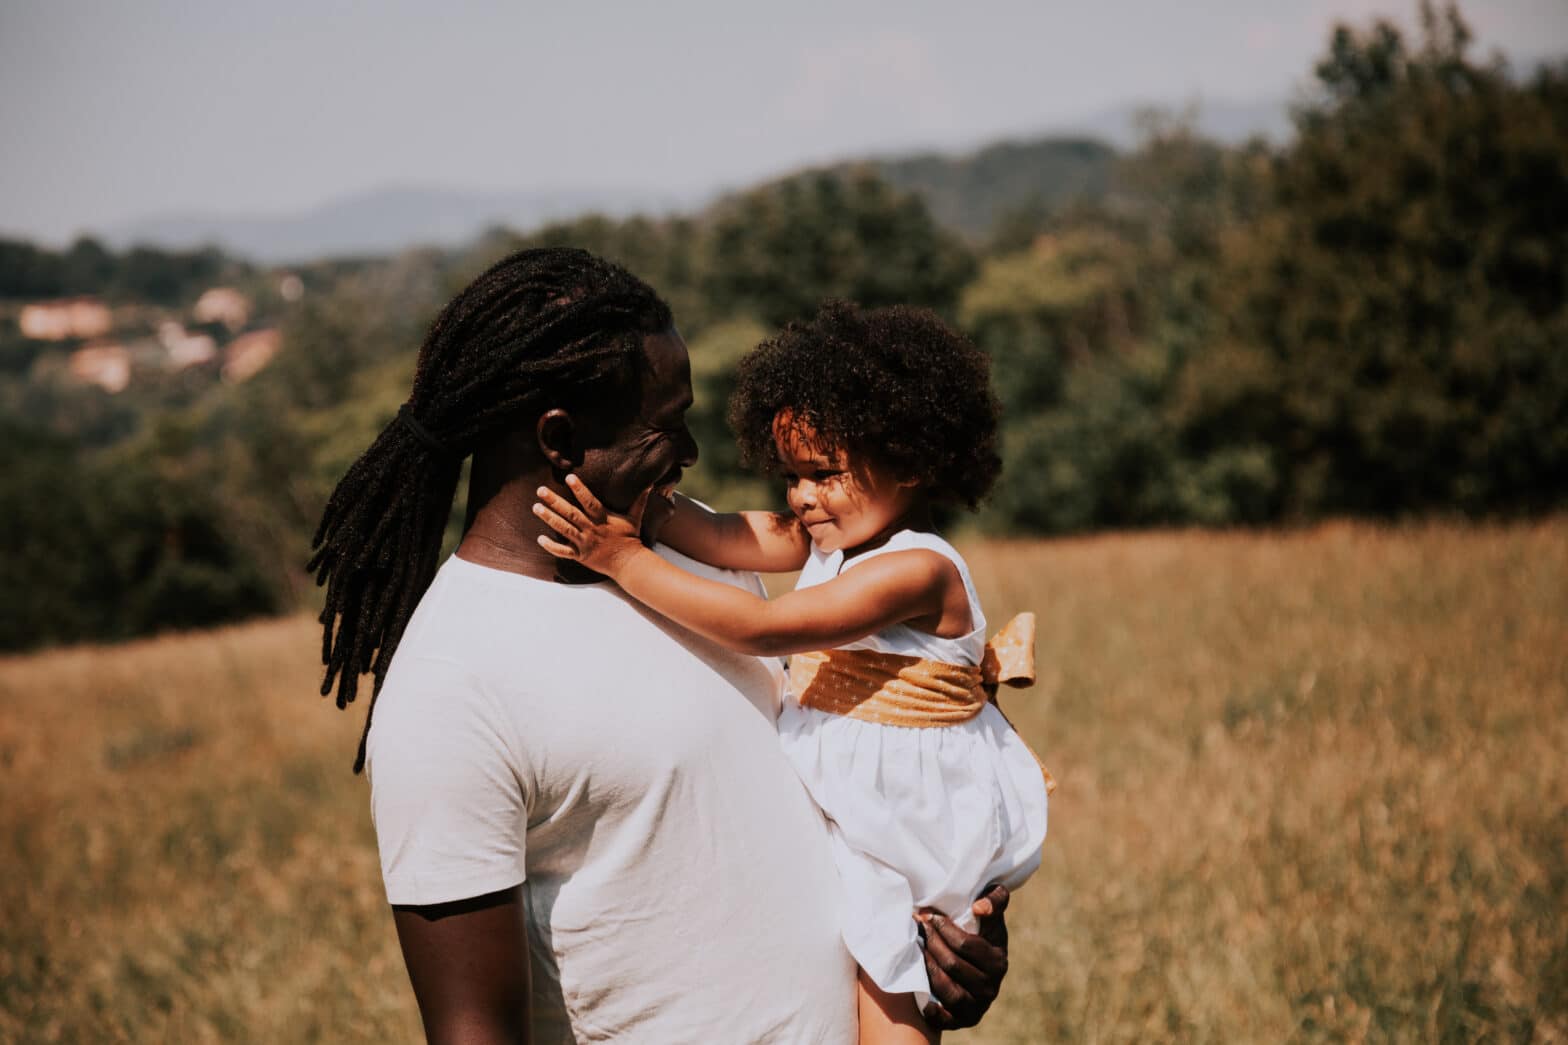 a black dad with locks hugs his daughter with frizzy hair in a field, looking at each other